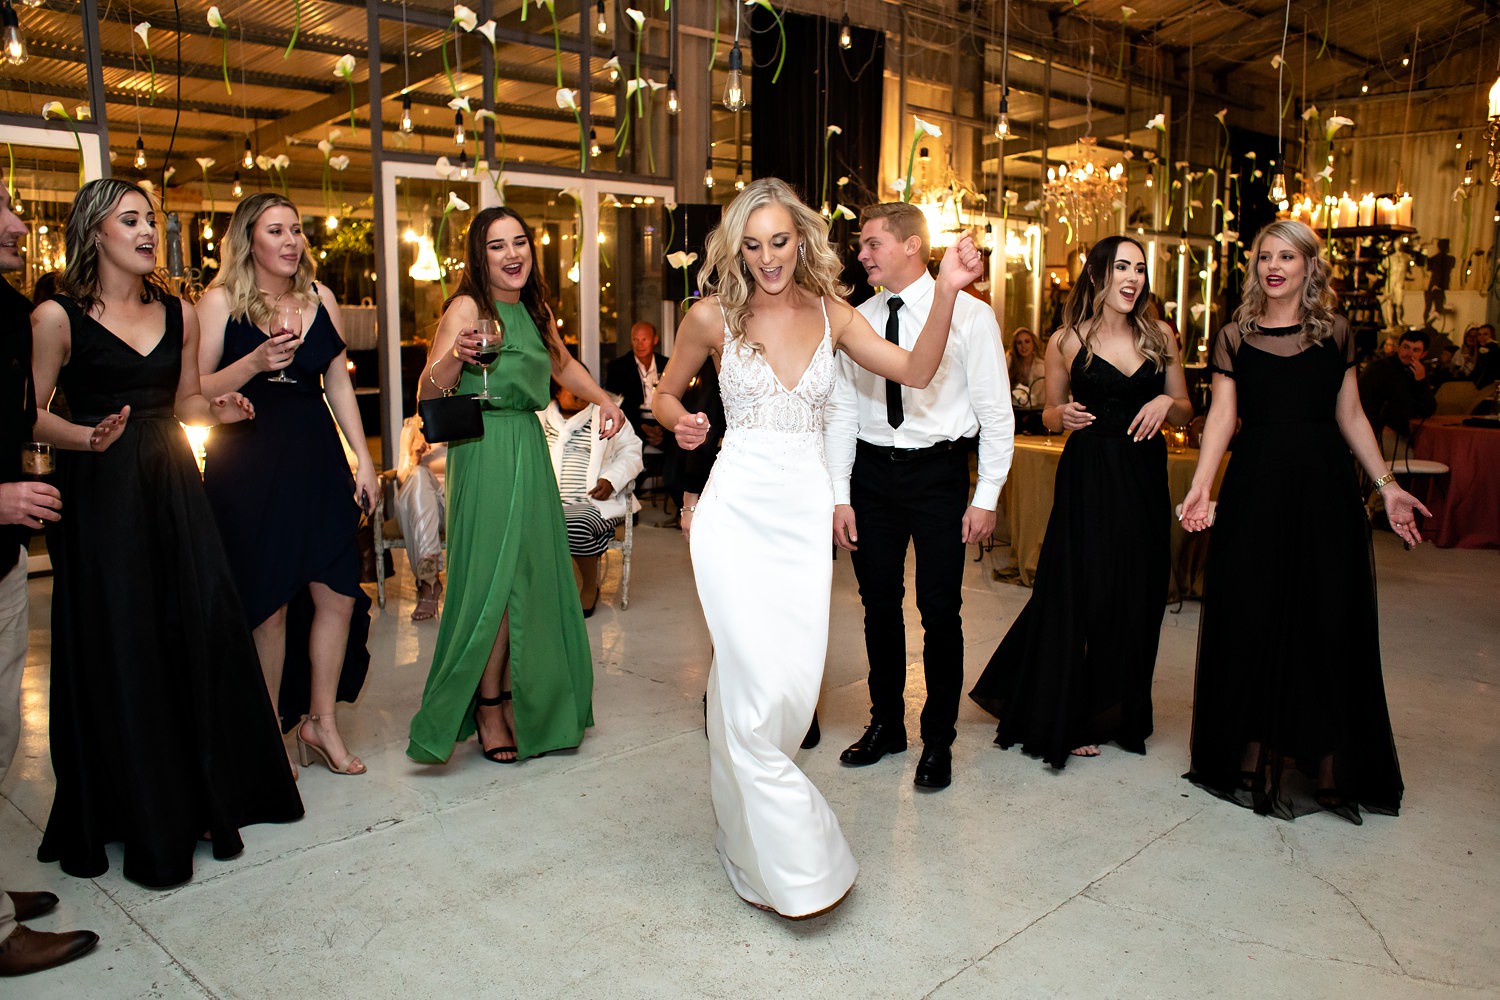 The bride dances into the middle of the circle of guests as the dancefloor opens on her wedding day. Dressed by Jason Kieck